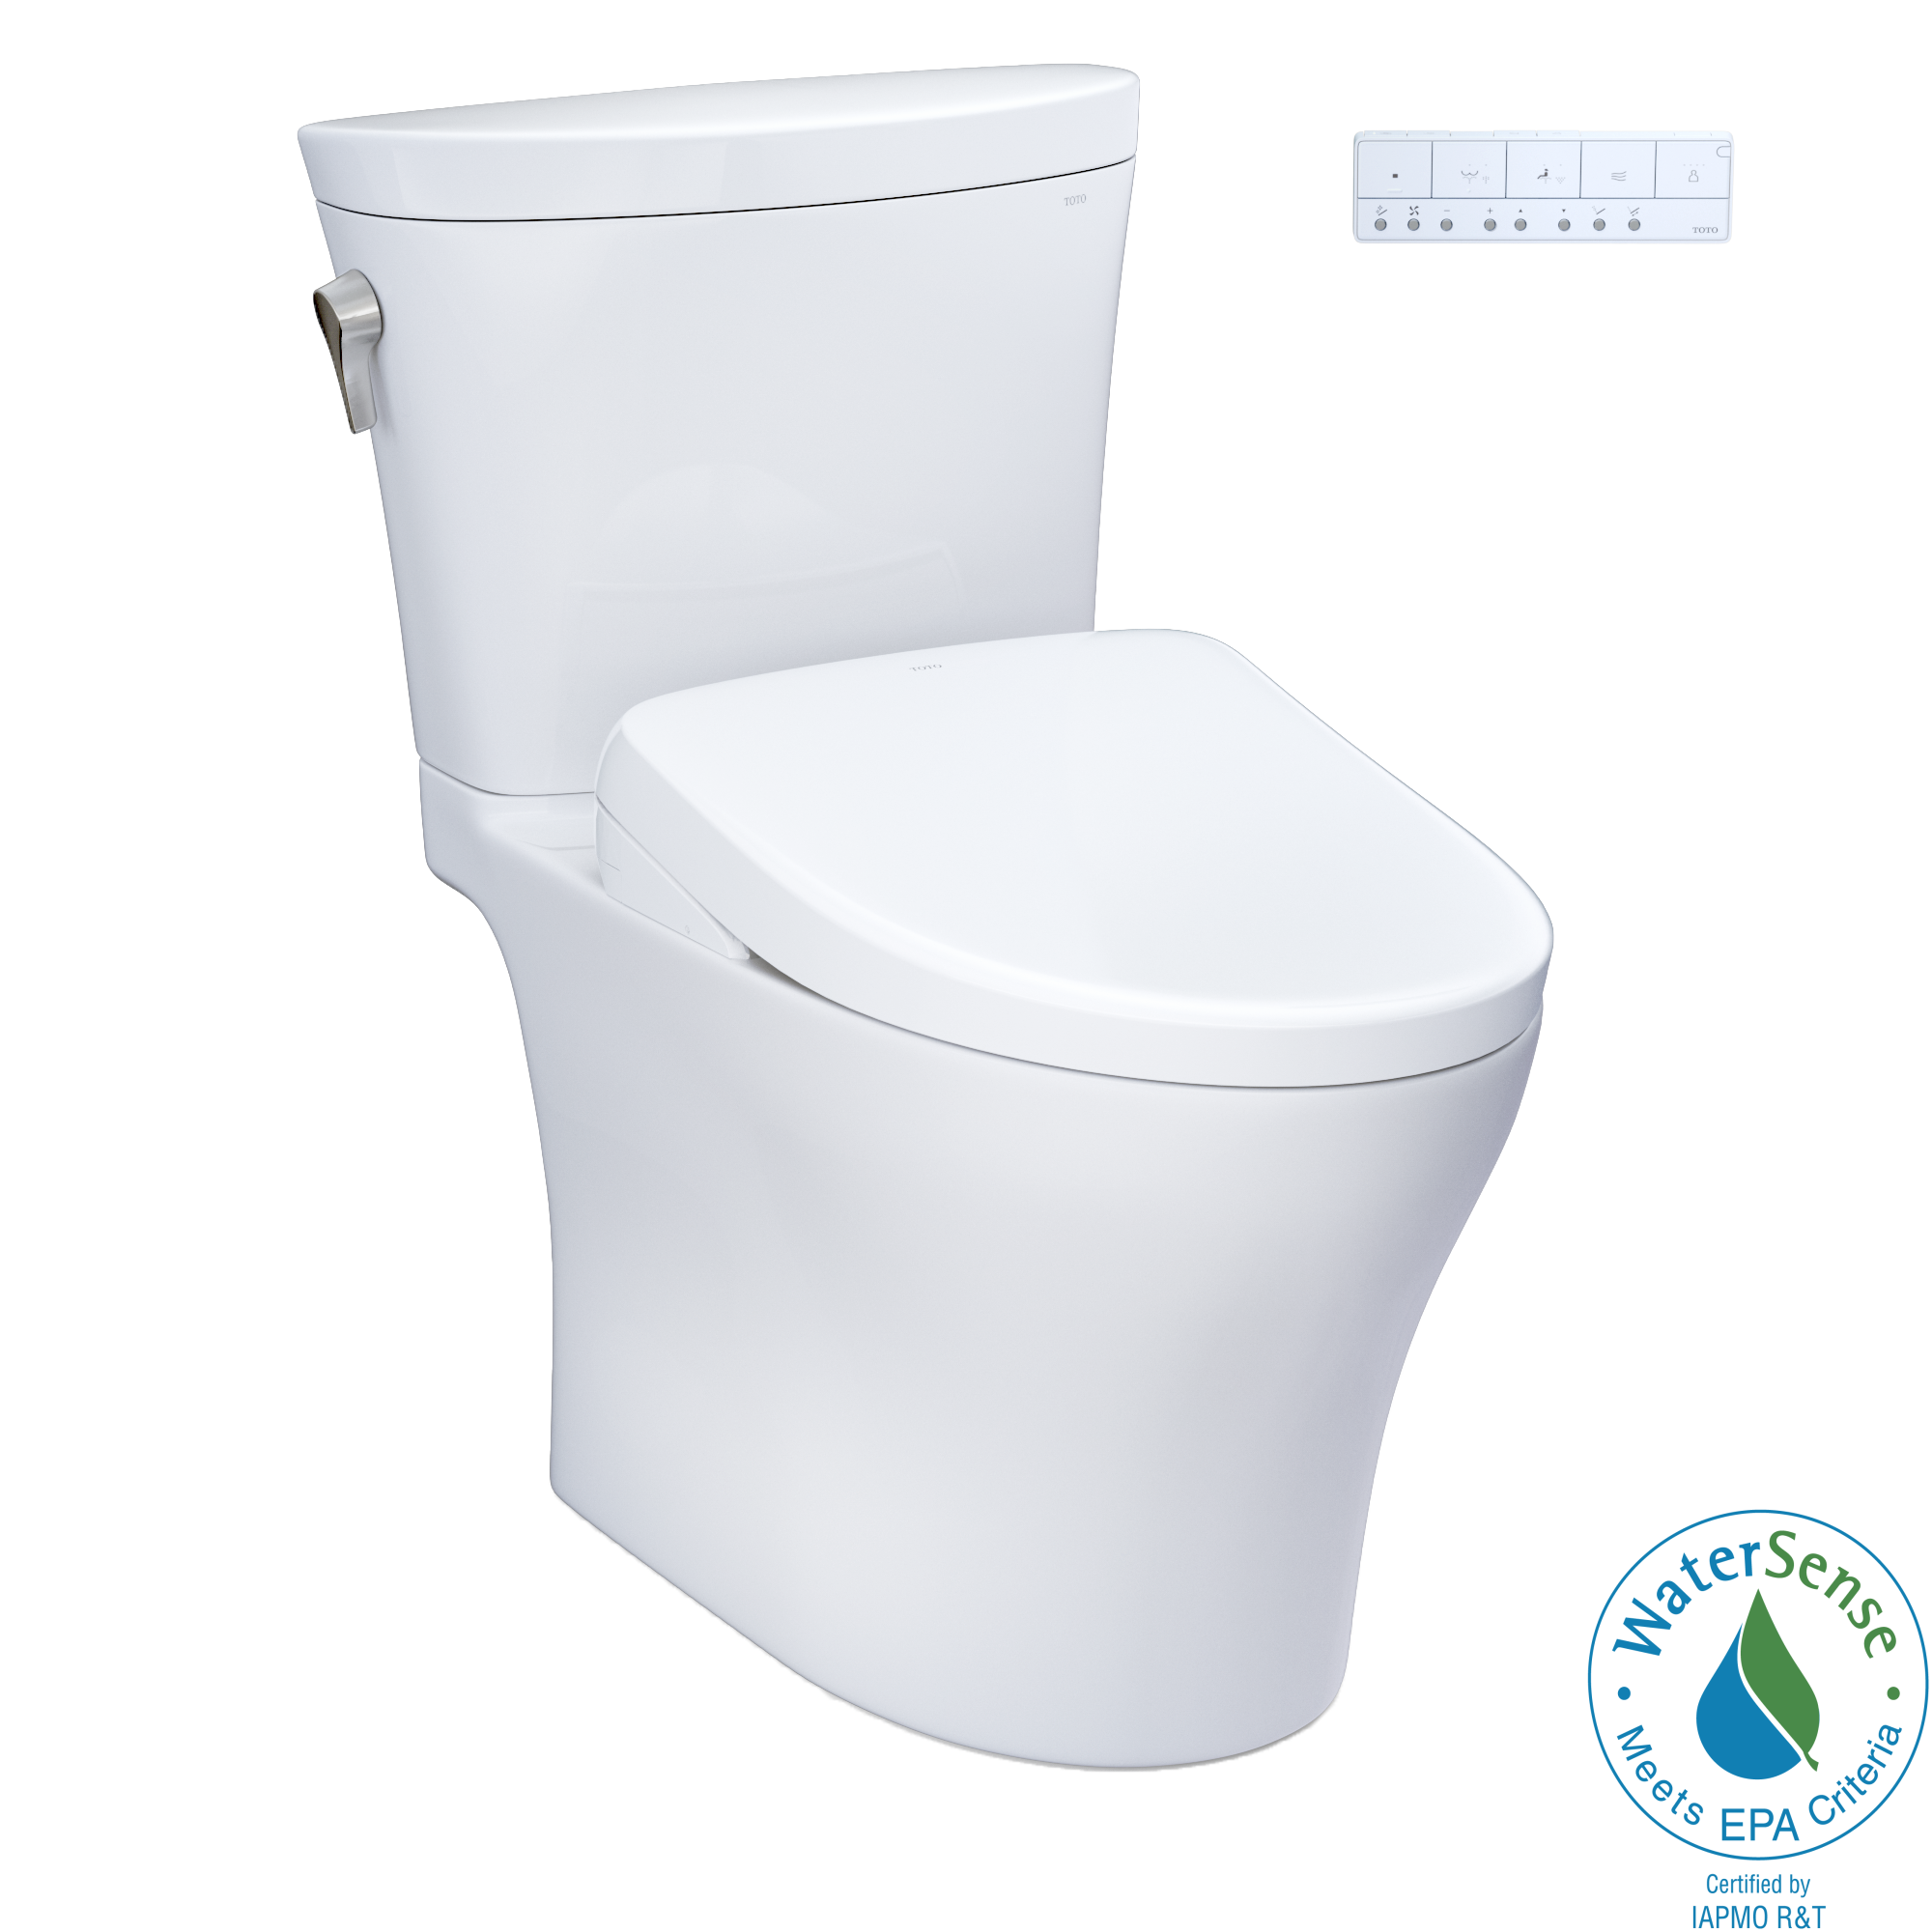 TOTO WASHLET+ Aquia IV Arc Two-Piece Elongated Dual Flush 1.28 and 0.9 GPF Toilet with S7A Contemporary Bidet Seat, Cotton White - MW4484736CEMFGN#01, MW4484736CEMFGNA#01